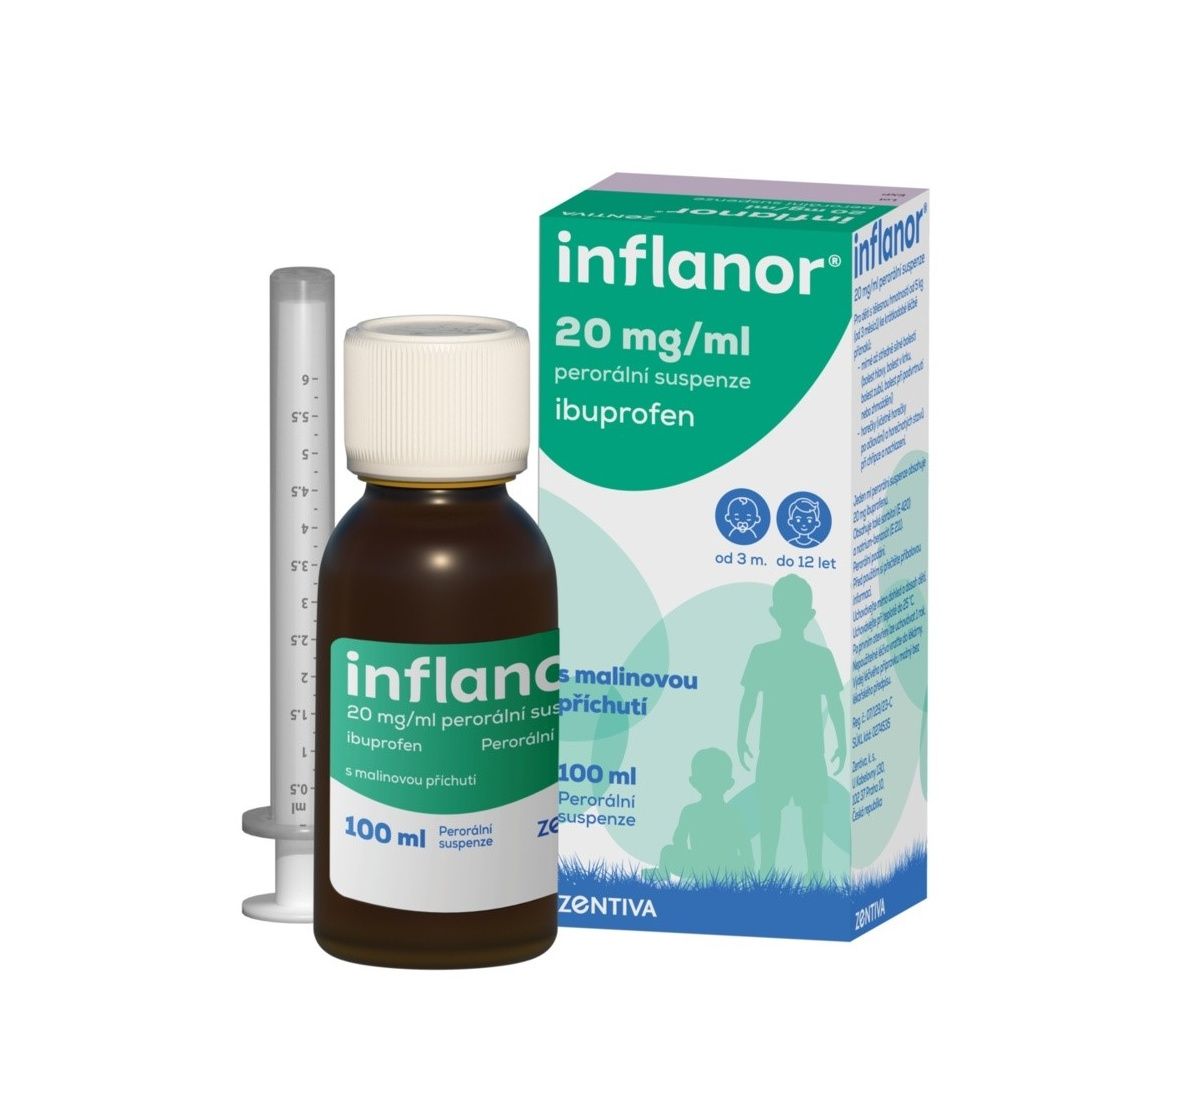 Inflanor 20 mg/ml perorální suspenze 100 ml Inflanor